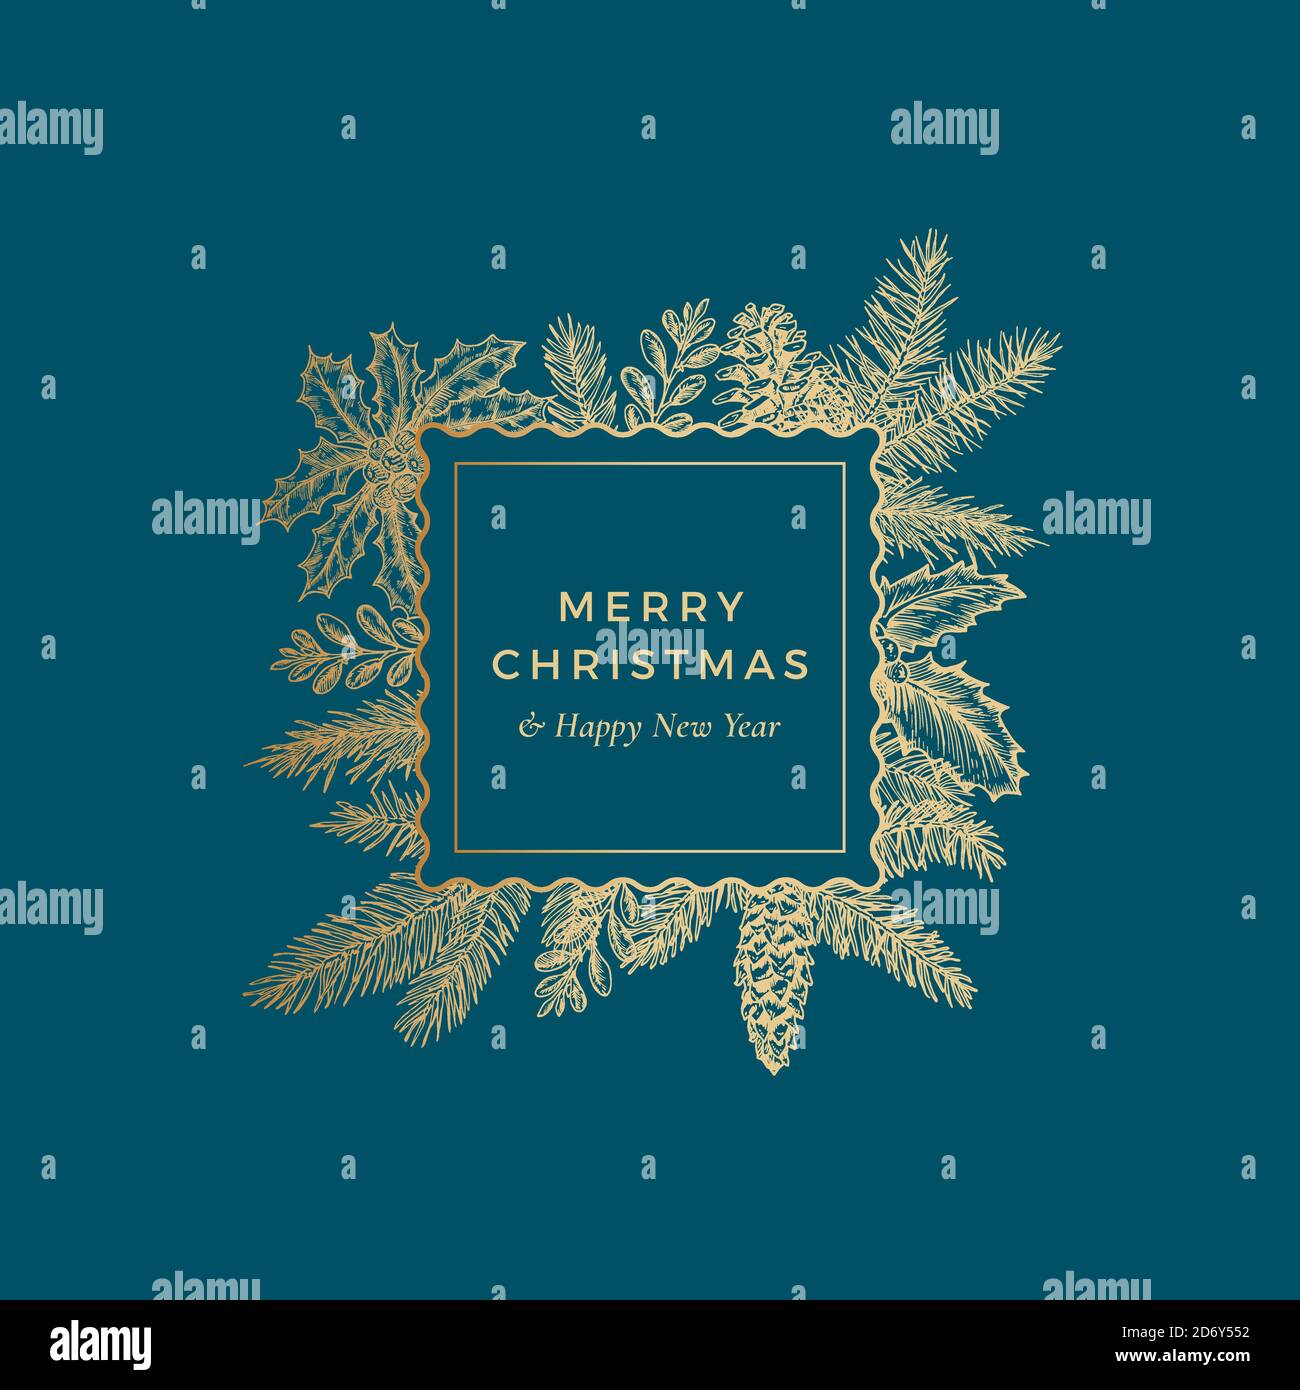 Merry Christmas Abstract Botanical Card with Square Frame Banner and Modern Typography. Premium Blue Background and Golden Greeting Sketch Layout Stock Vector